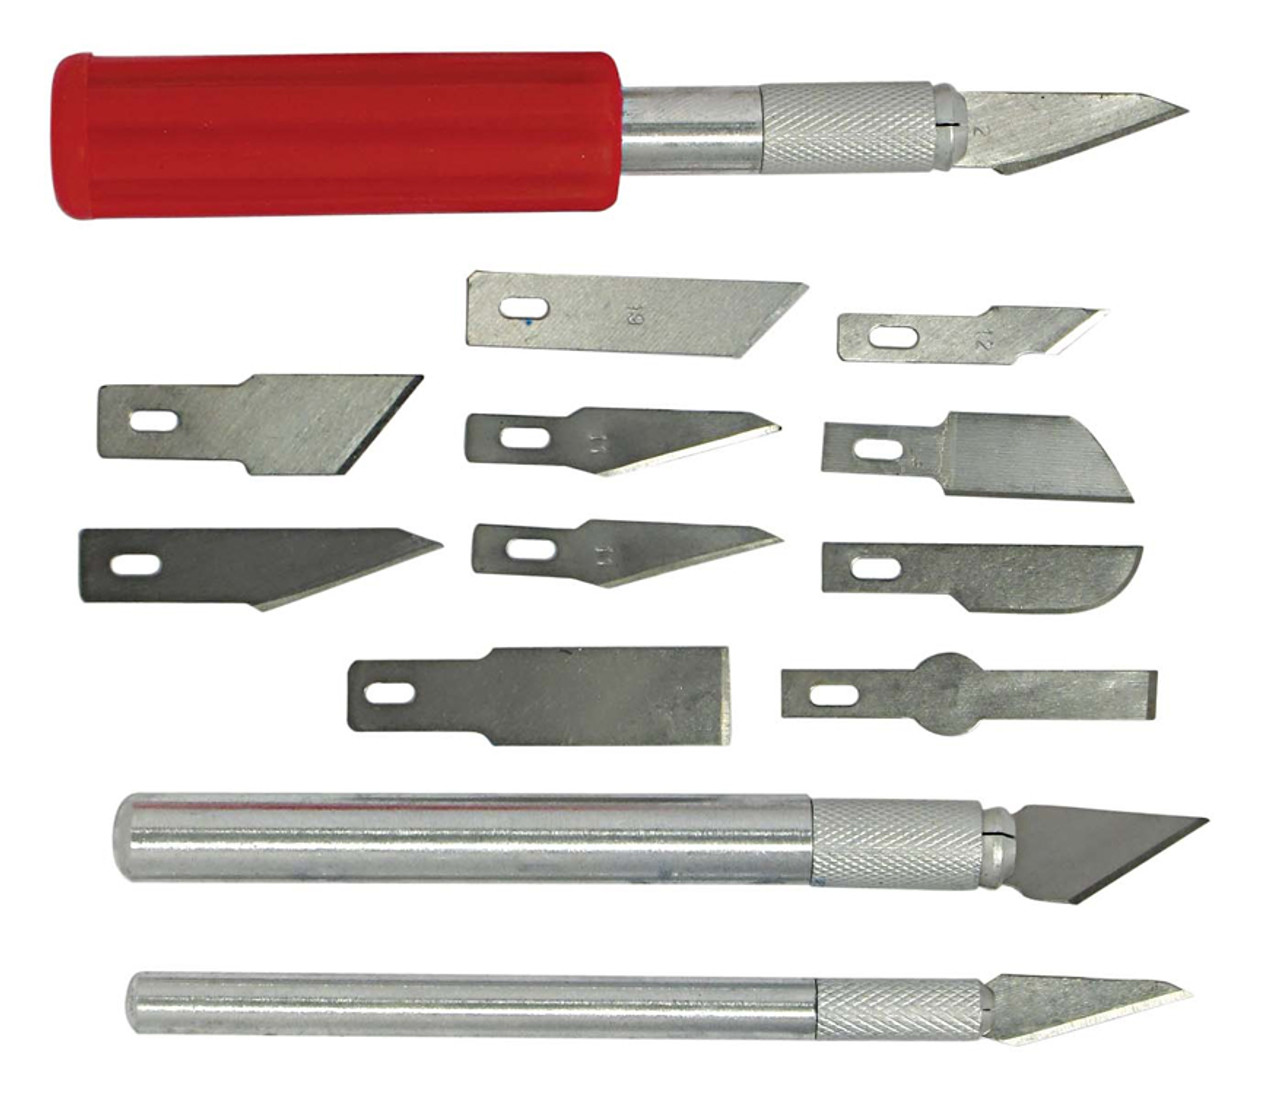 Hobby Knife Sets - 13 Interchangeable Blades, 3 Handles